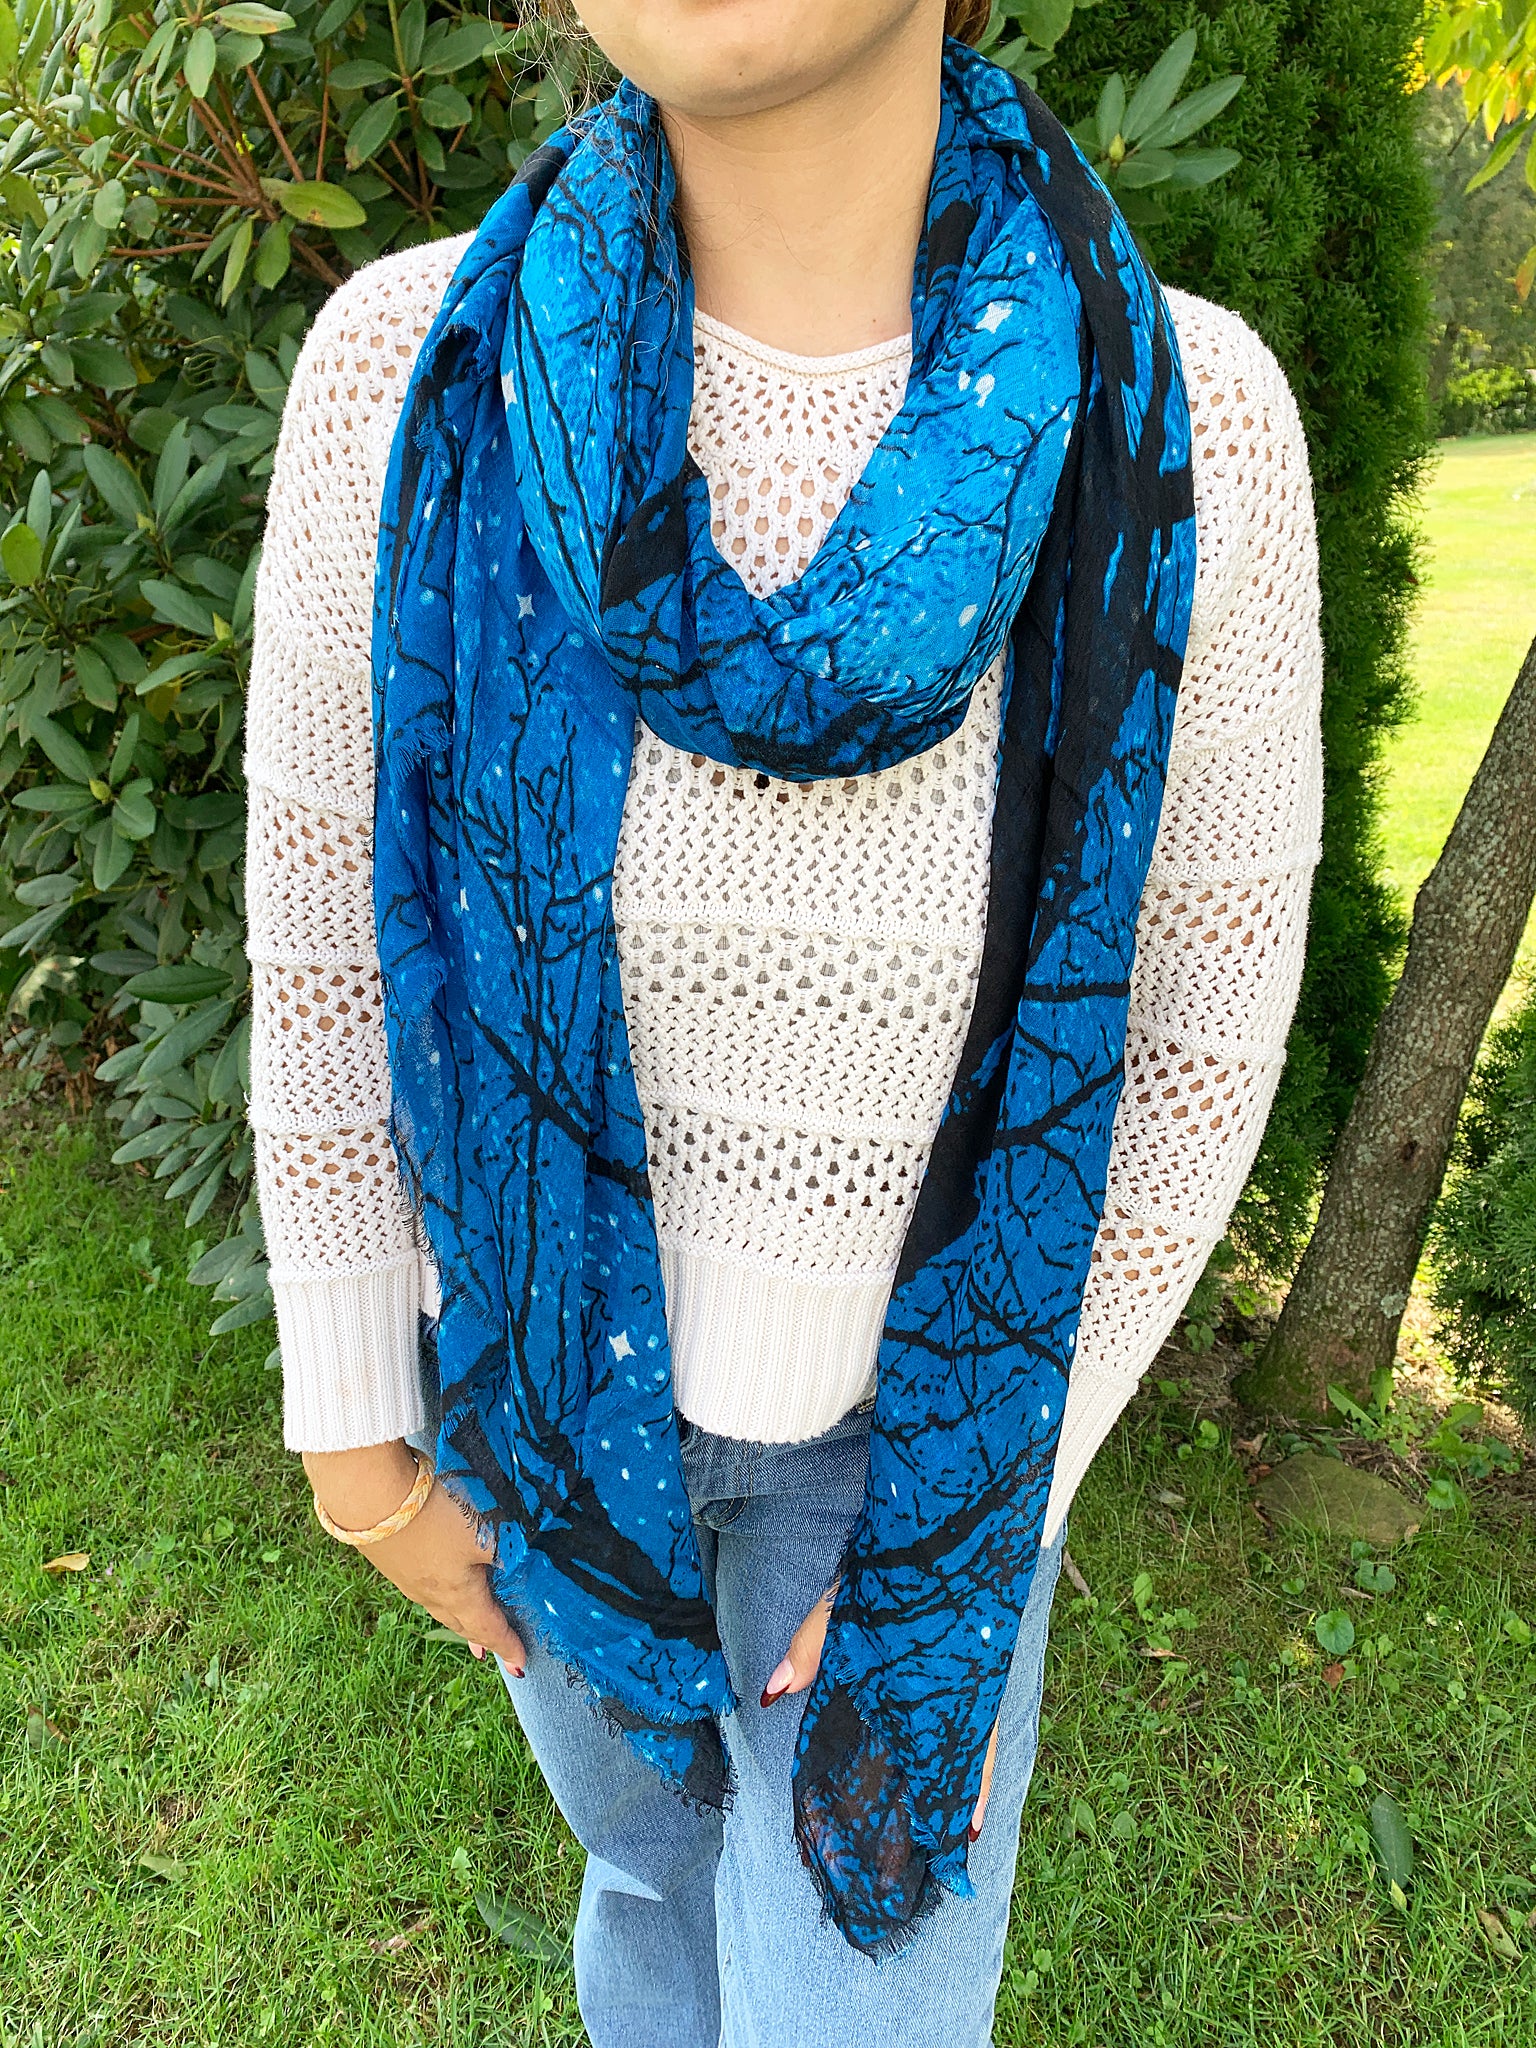 Blue Pacific Cashmere and Silk Sky and Tree Print Scarf in Cobalt Blue